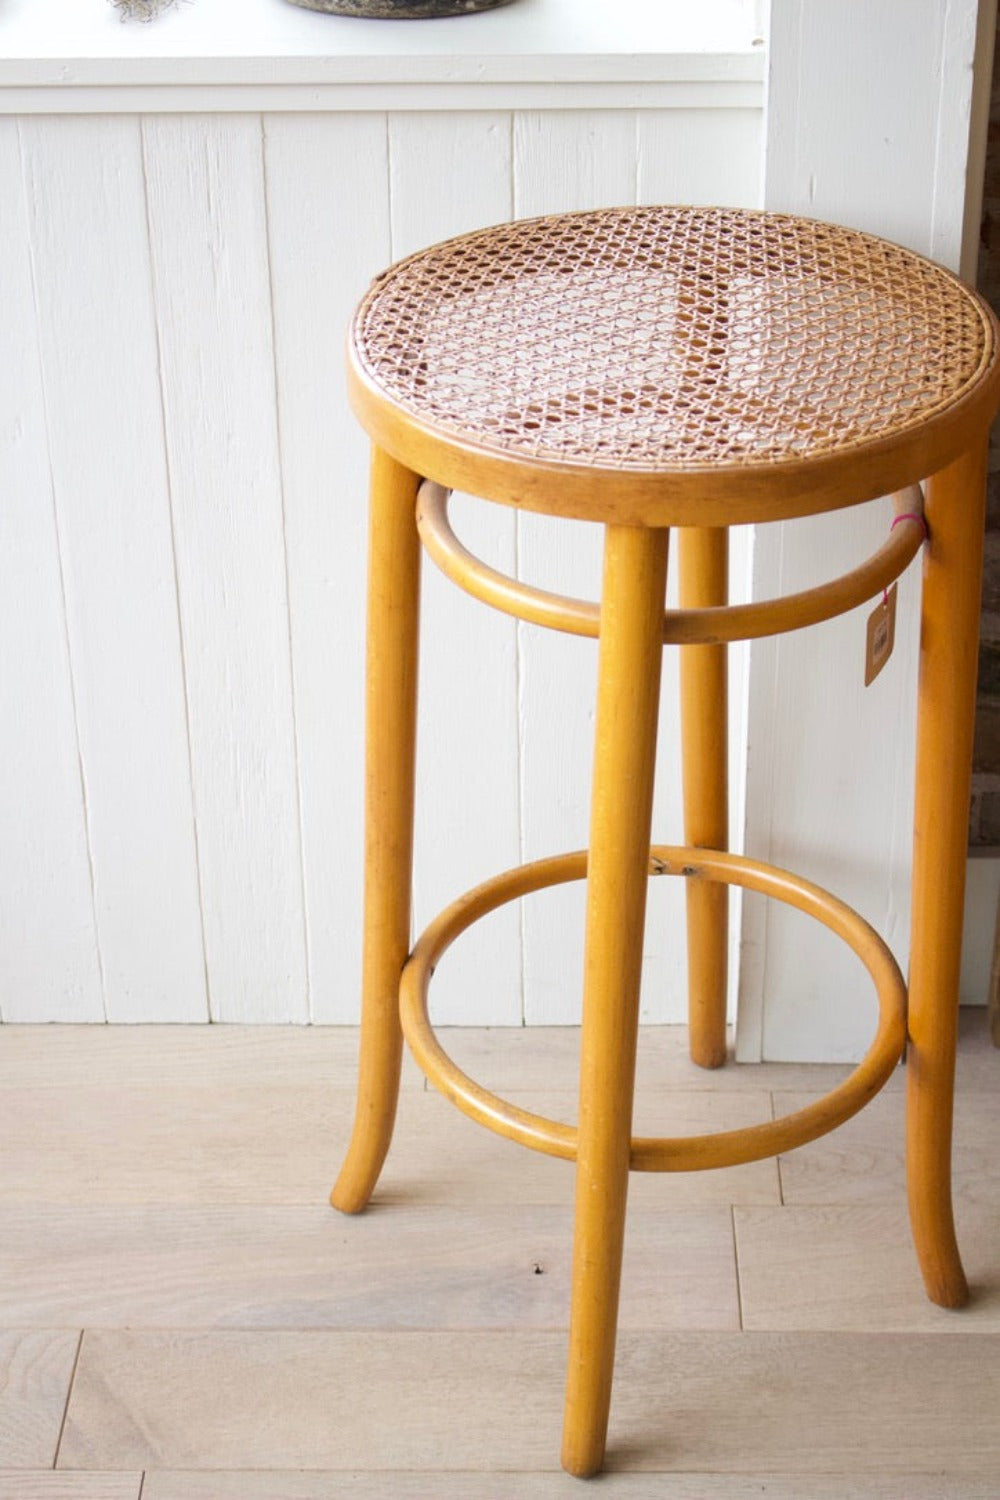 Tall Stool With Caning